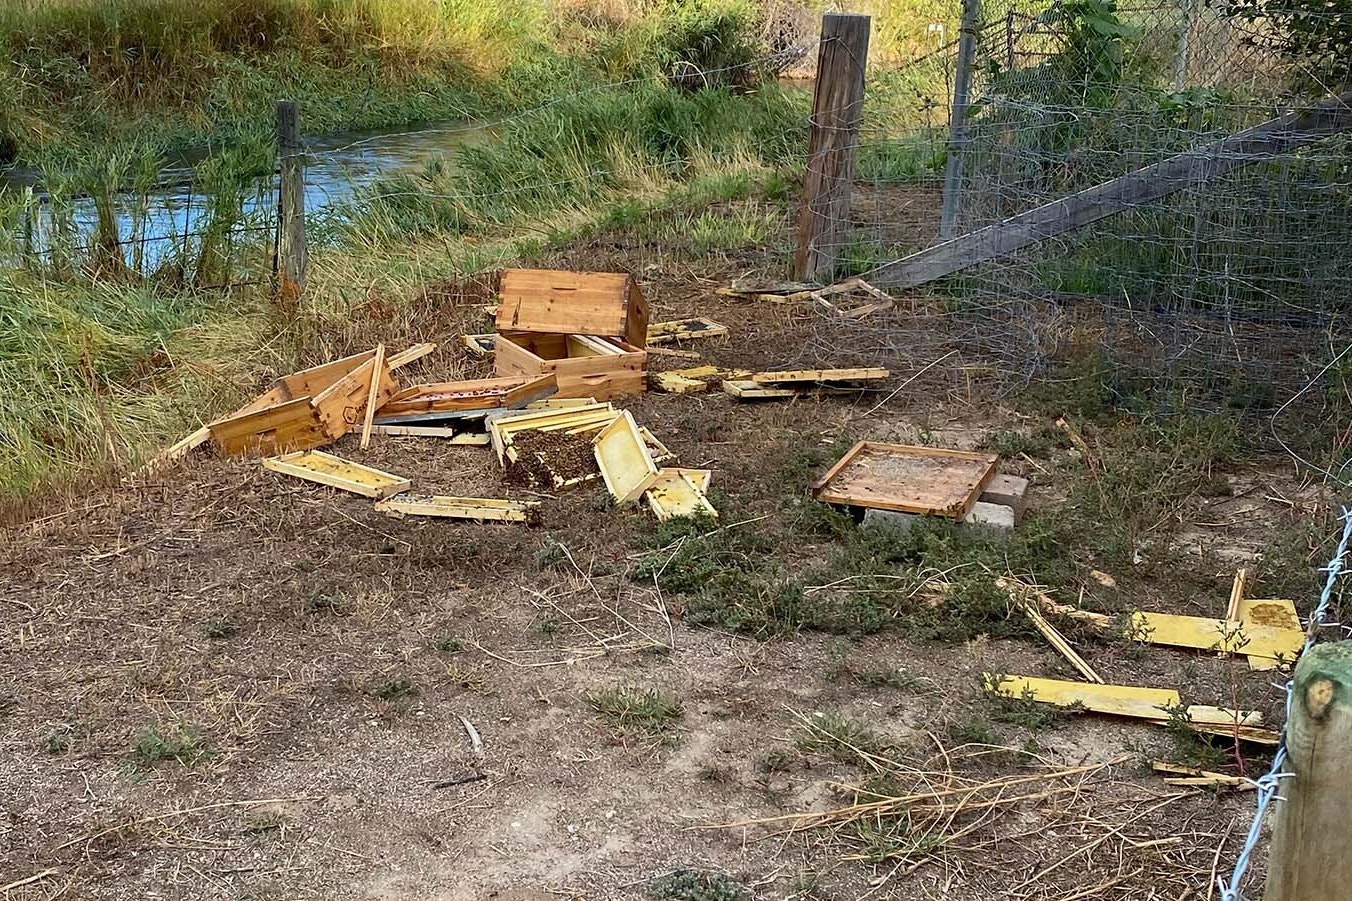 A young black bear Big Horn County beekeeper Kevin Clark has dubbed "Winnie the Pooh" has been raiding his beehives and gorging himself on honey, smashing the hives in the process.